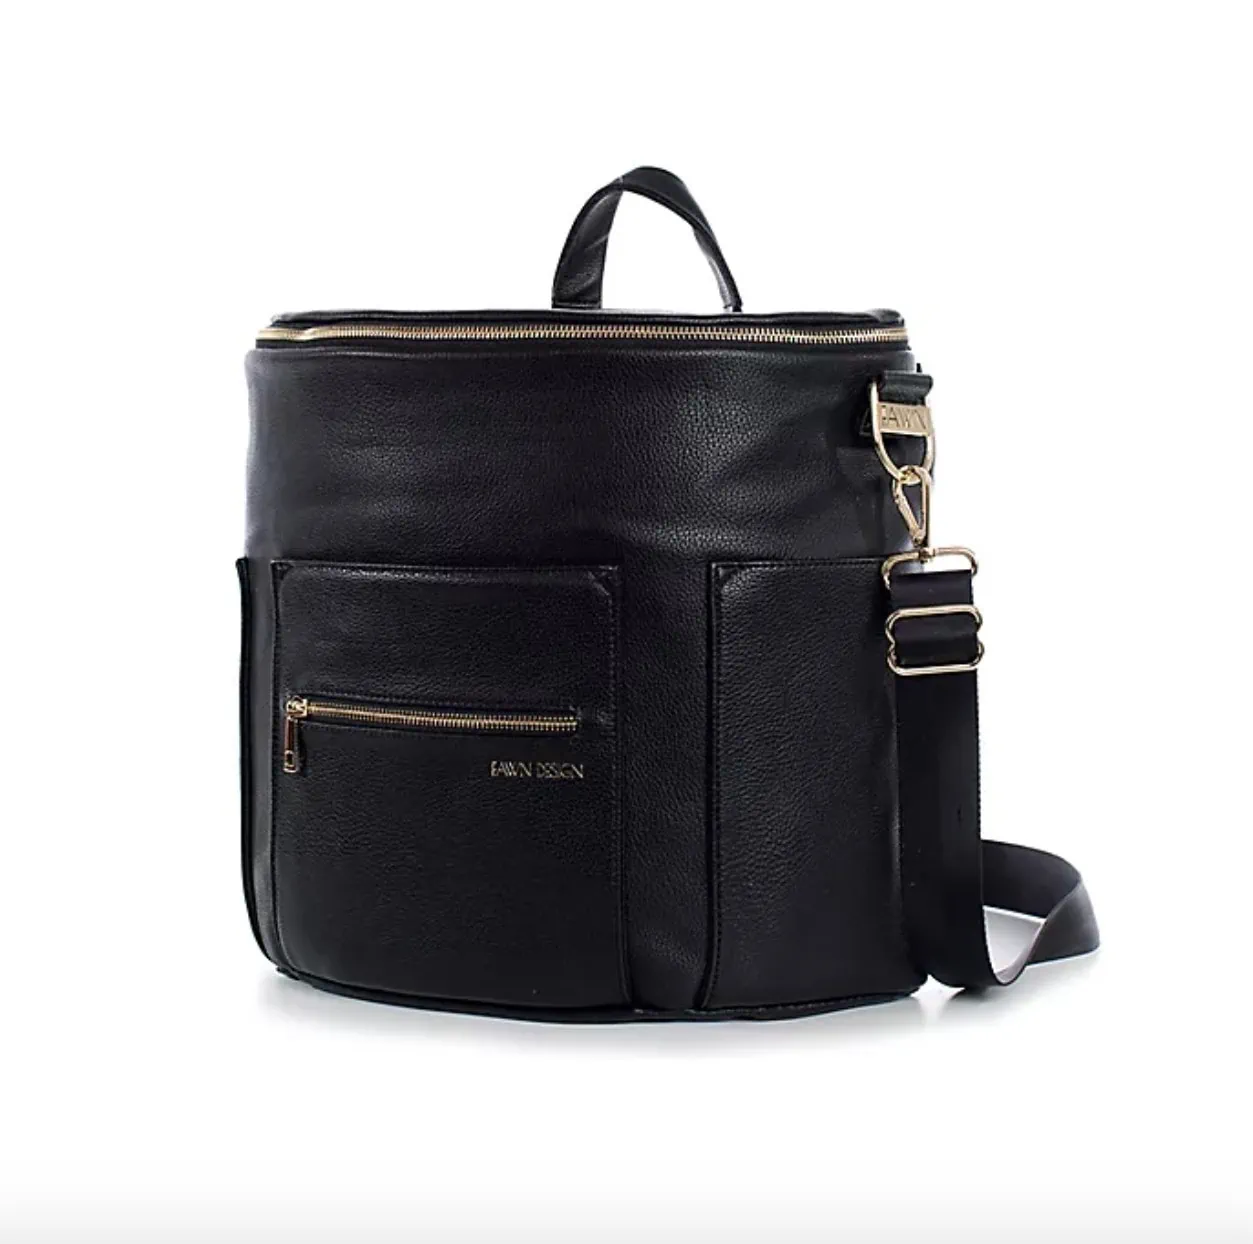 A Black leather diaper bag on a white background